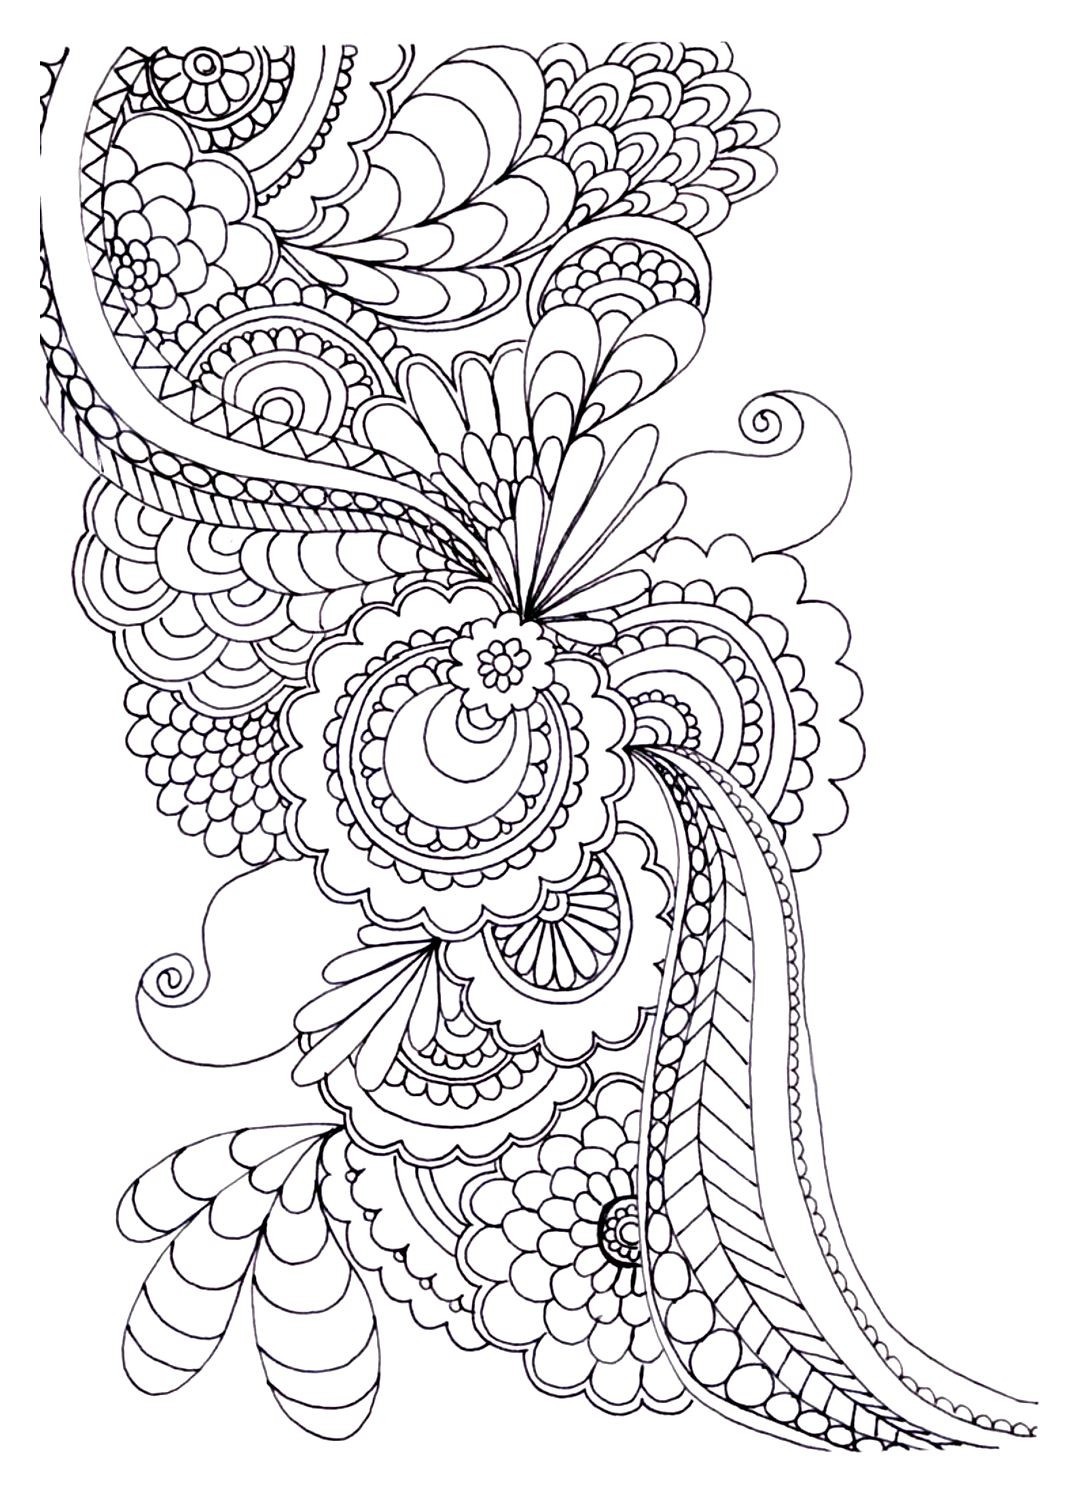 Coloring Sheet For Adults
 20 Free Adult Colouring Pages The Organised Housewife